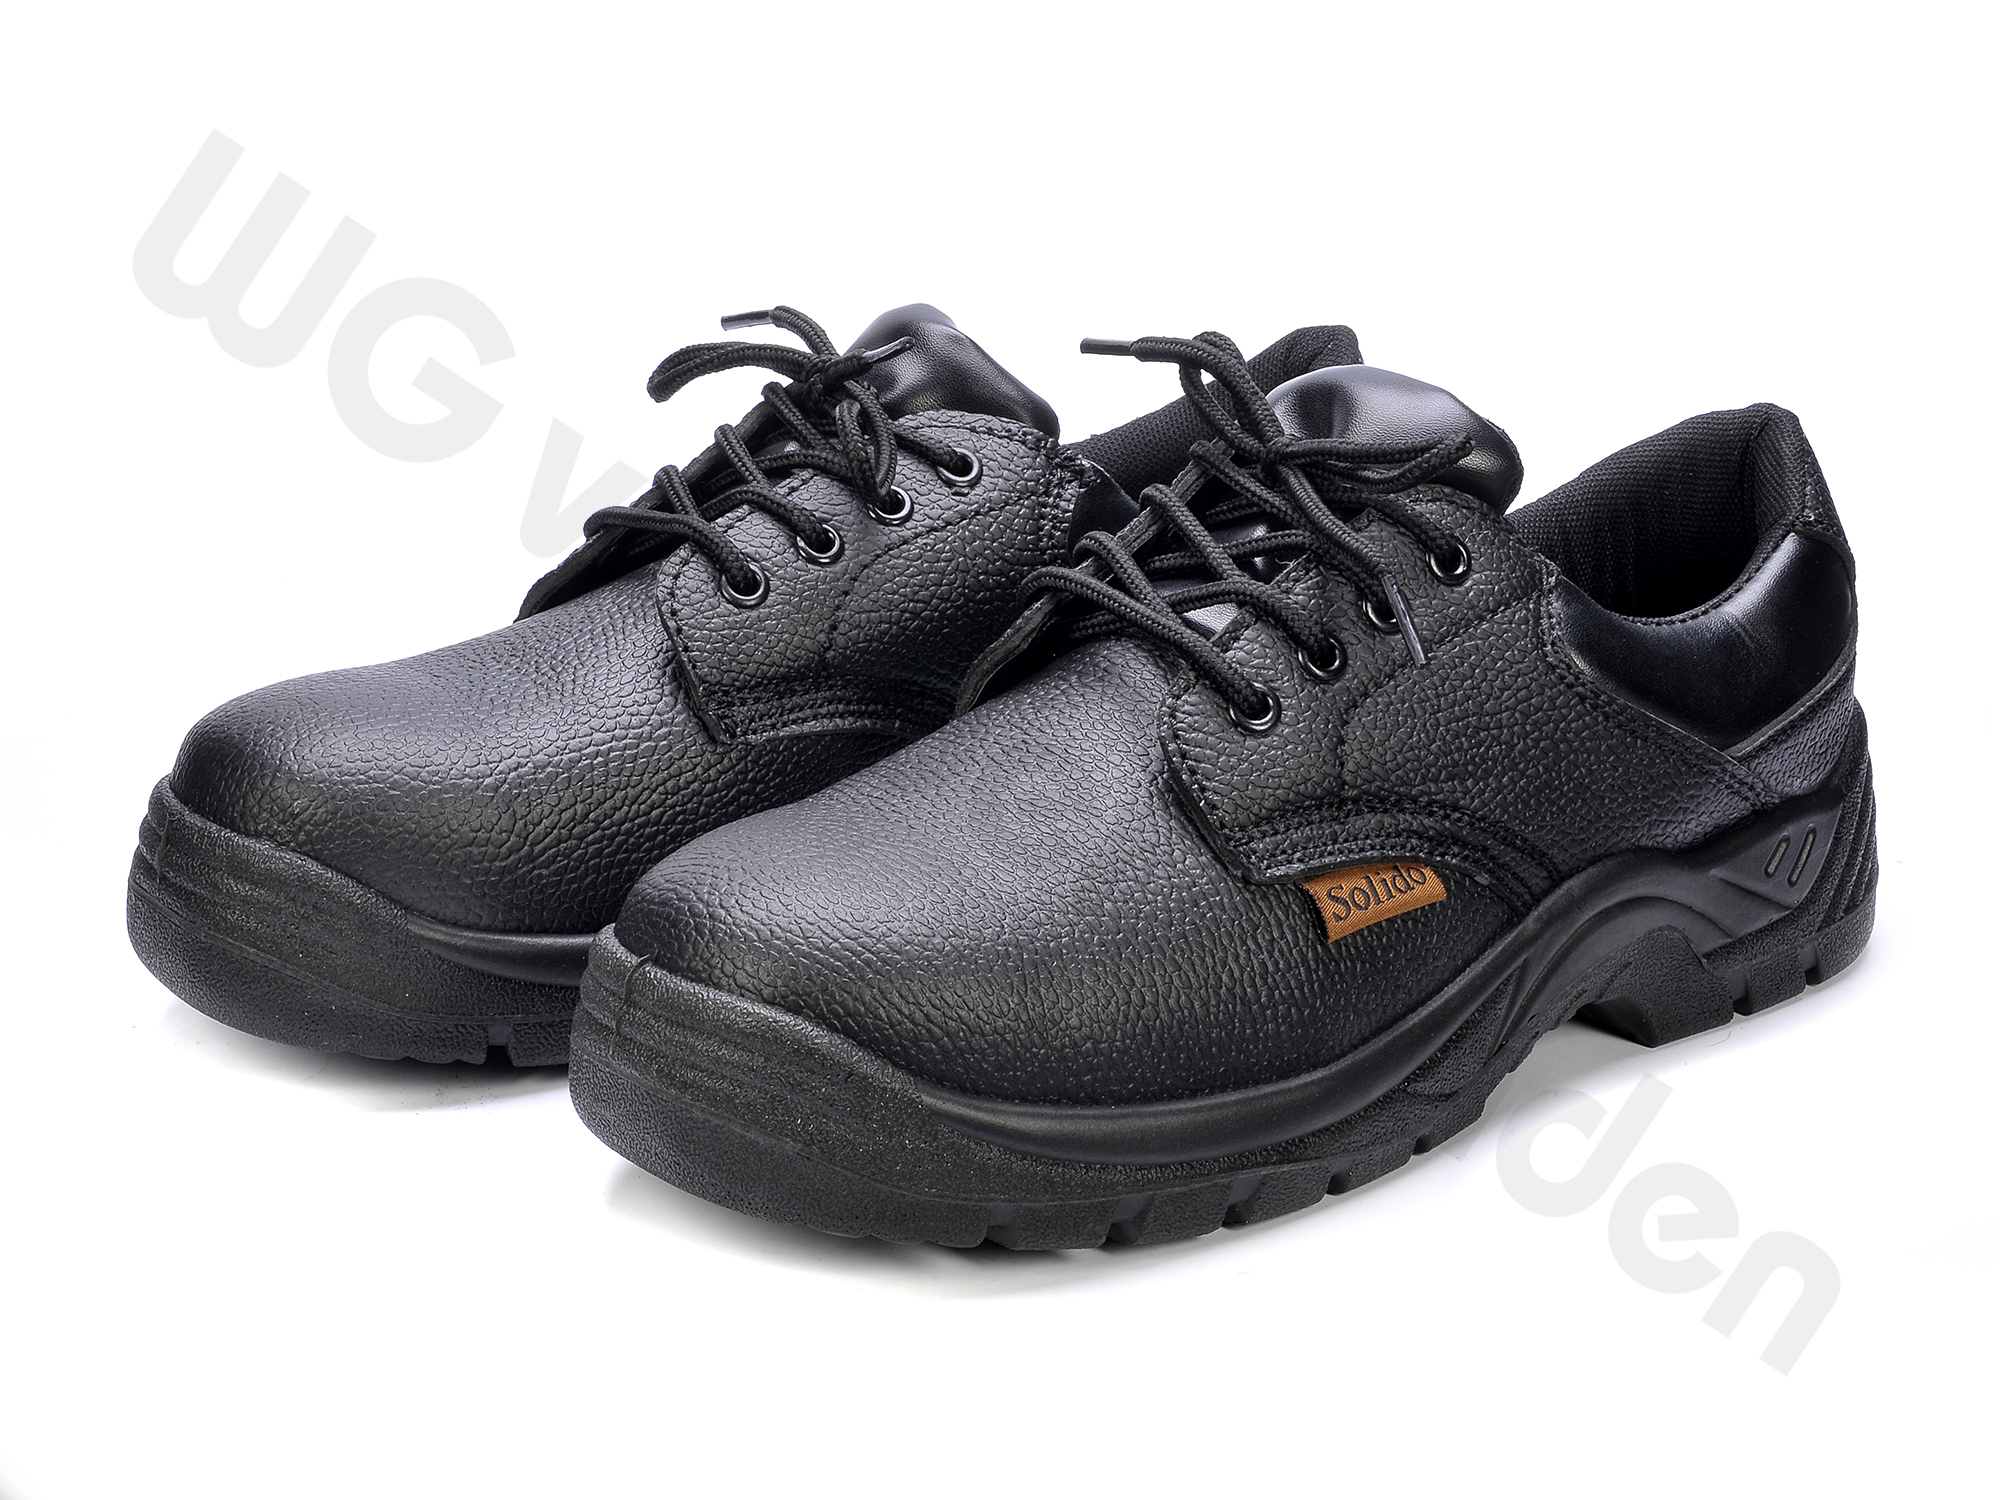 880613 SHOES SAFETY S1 WITH STEEL TOE SIZE 50 / 32CM CE